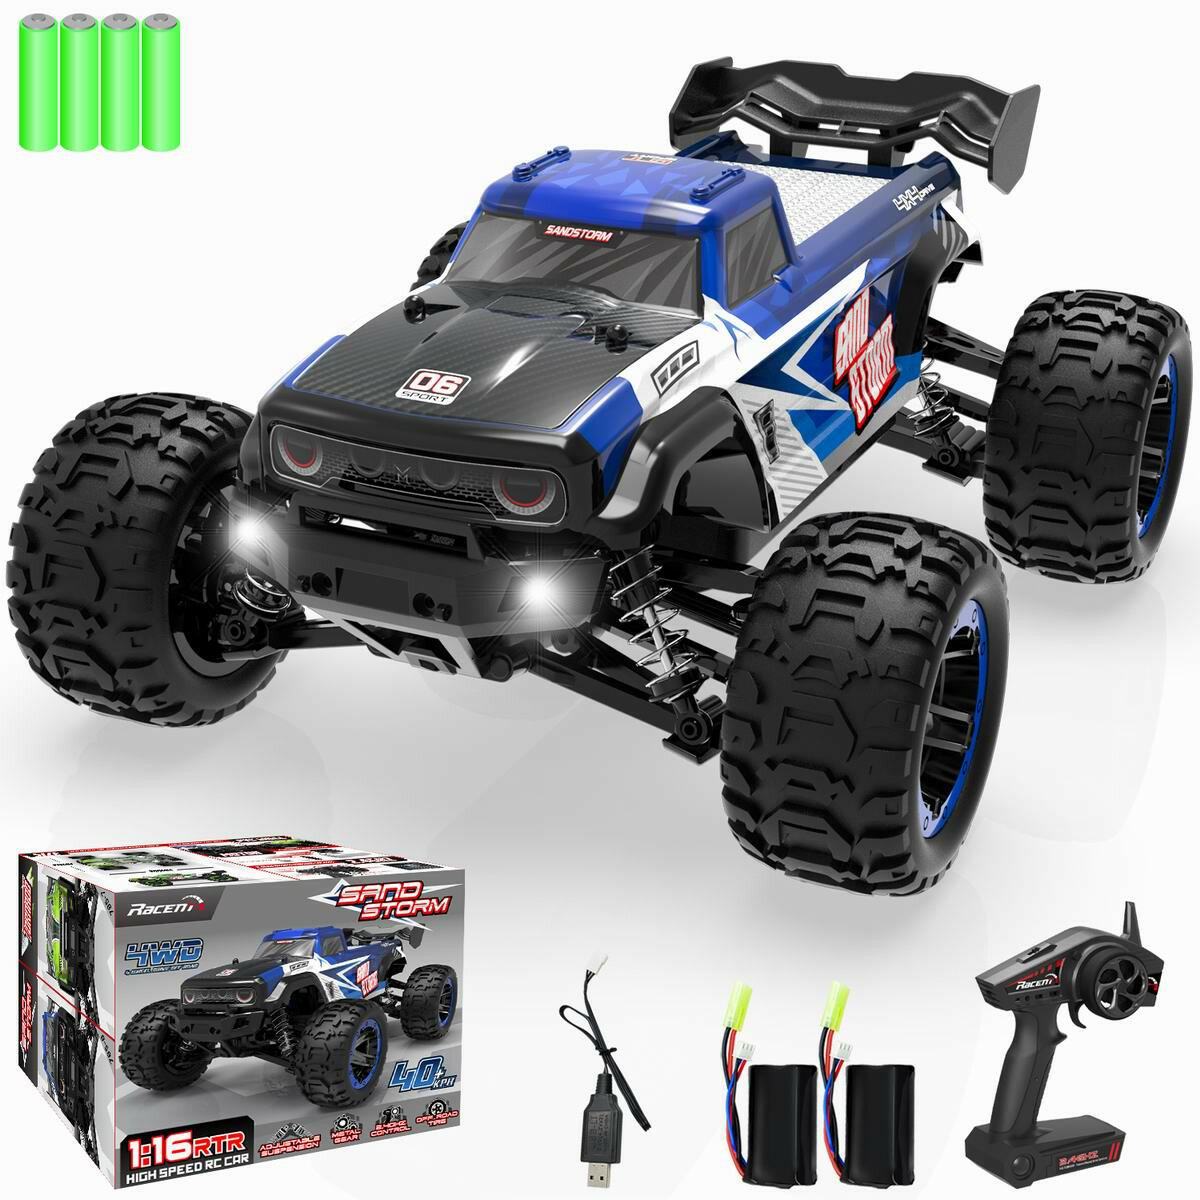 RACENT 1:16 Scale SandStorm 30MPH High Speed 4WD 2.4 GHz RC Monster Truck(785-6).